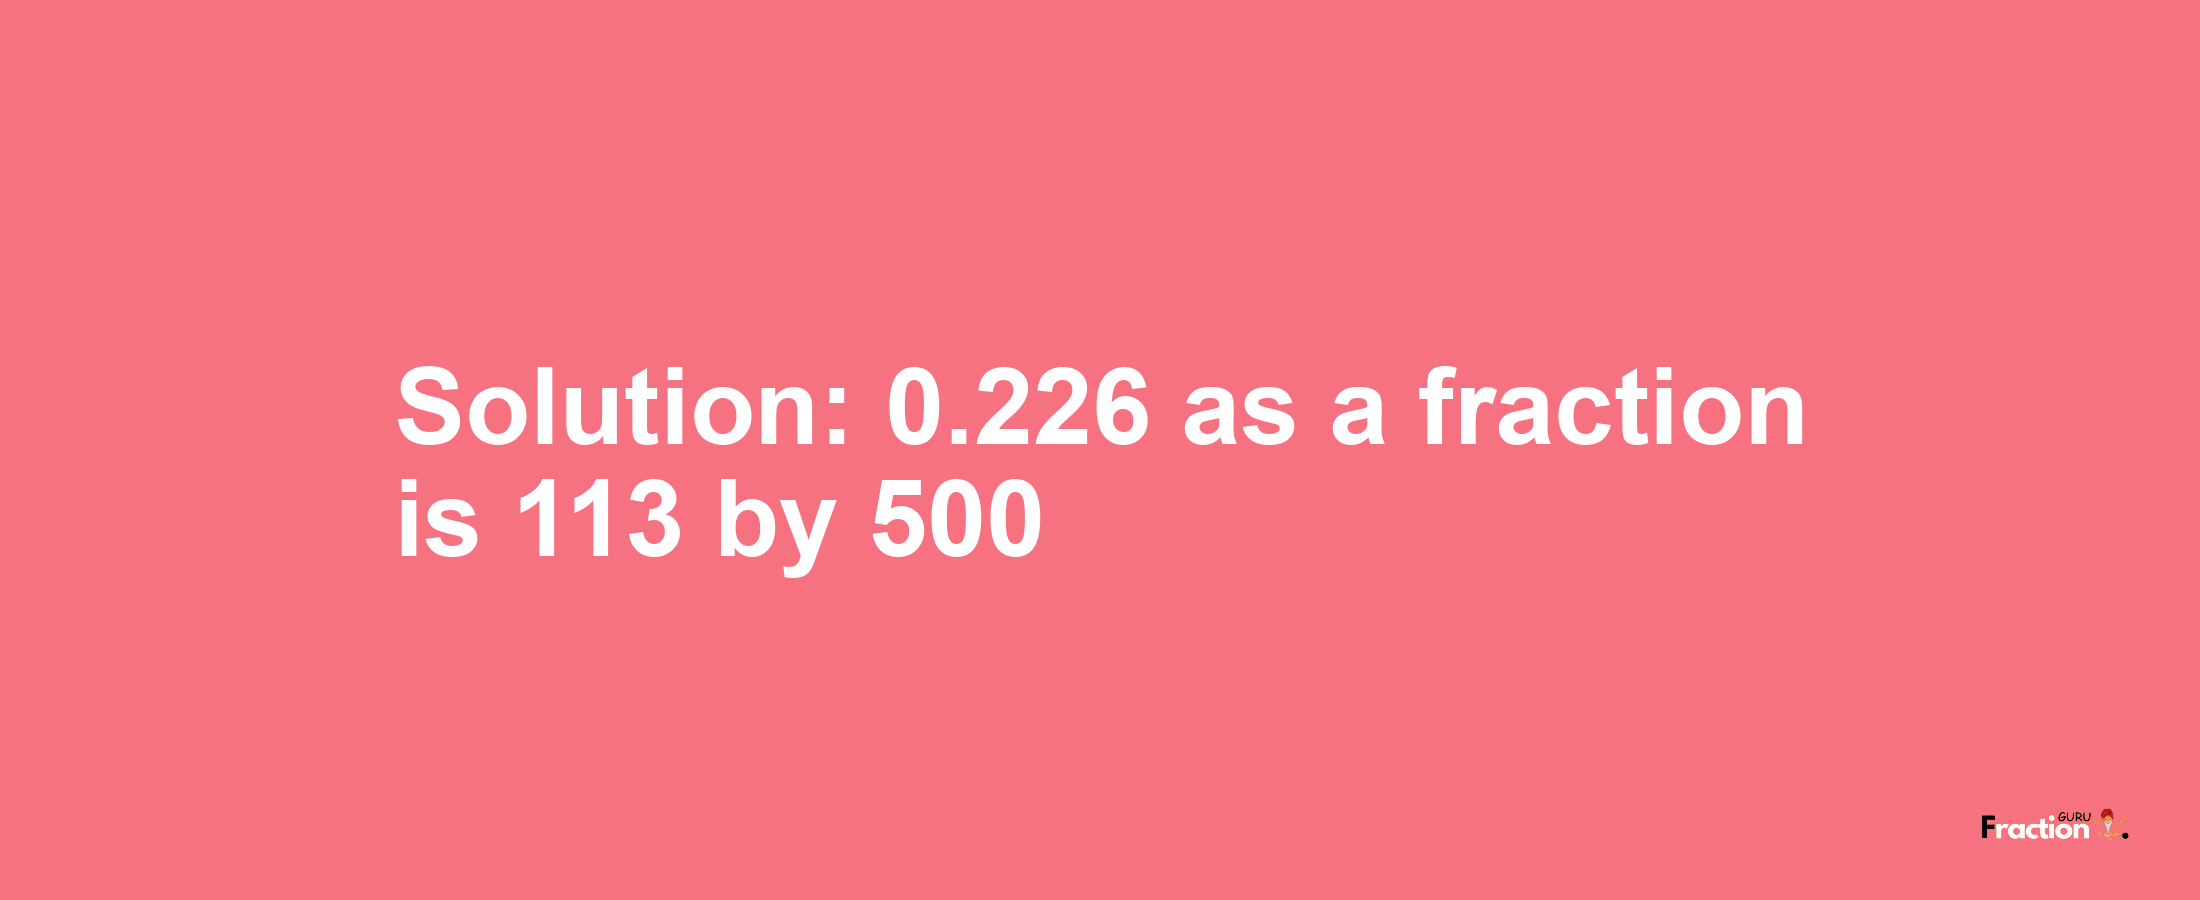 Solution:0.226 as a fraction is 113/500